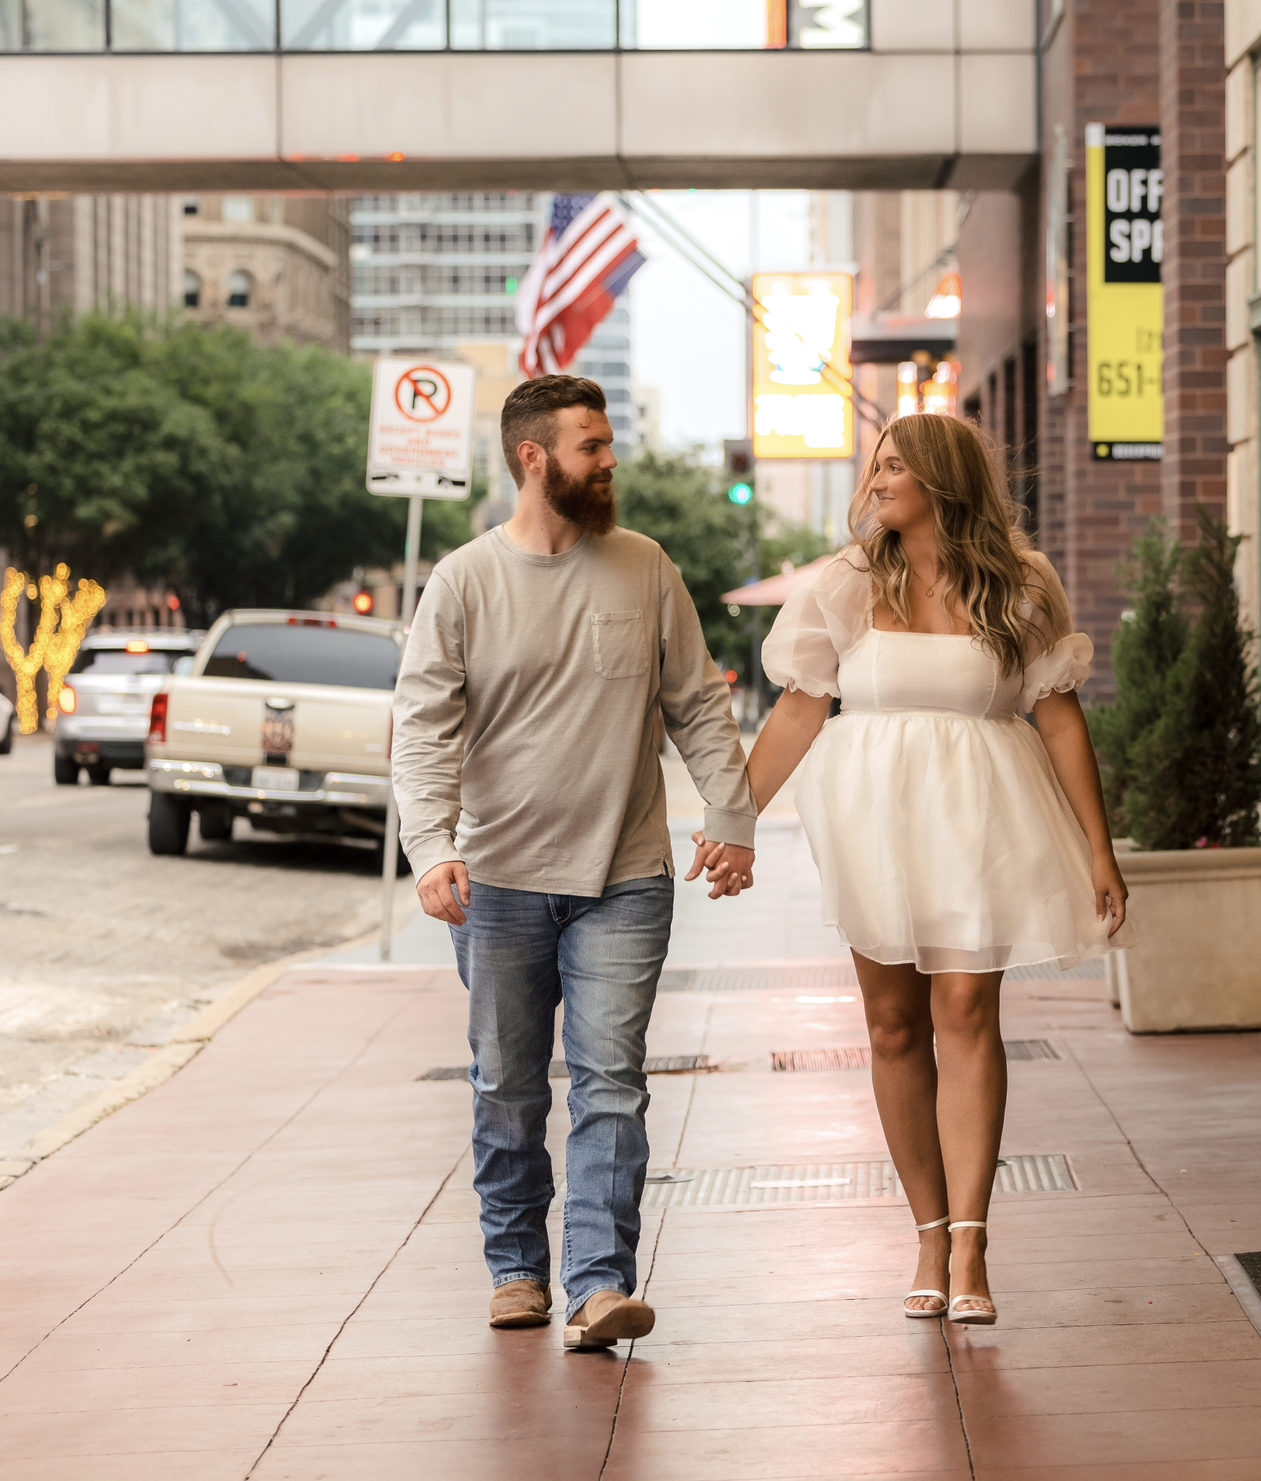 The Wedding Website of Kamree Clark and Brody Bushnell